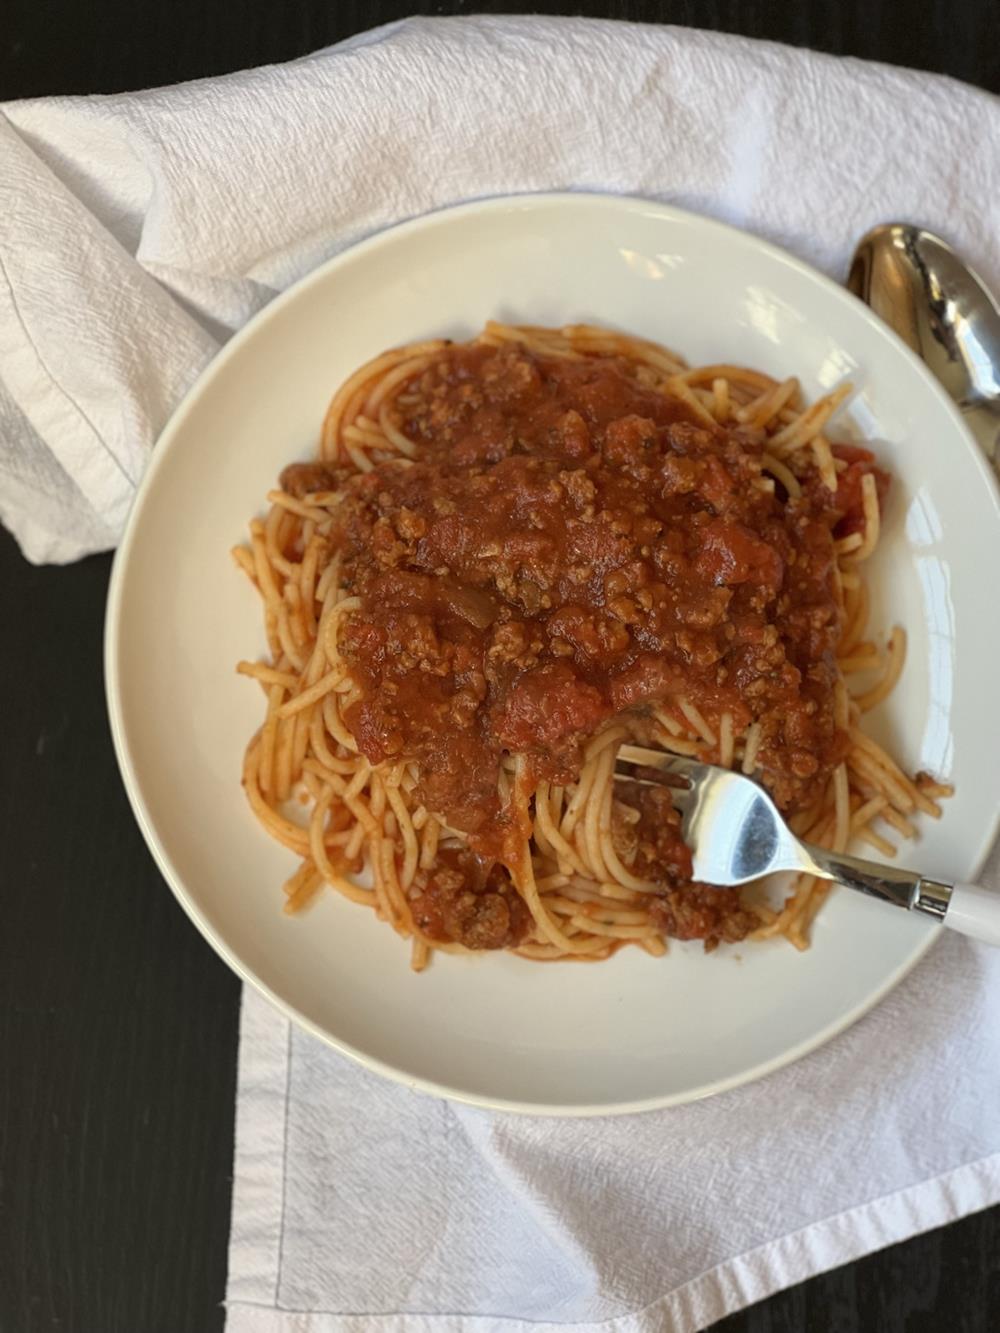 How to make the SIMPLEST spaghetti bolognese recipe at home